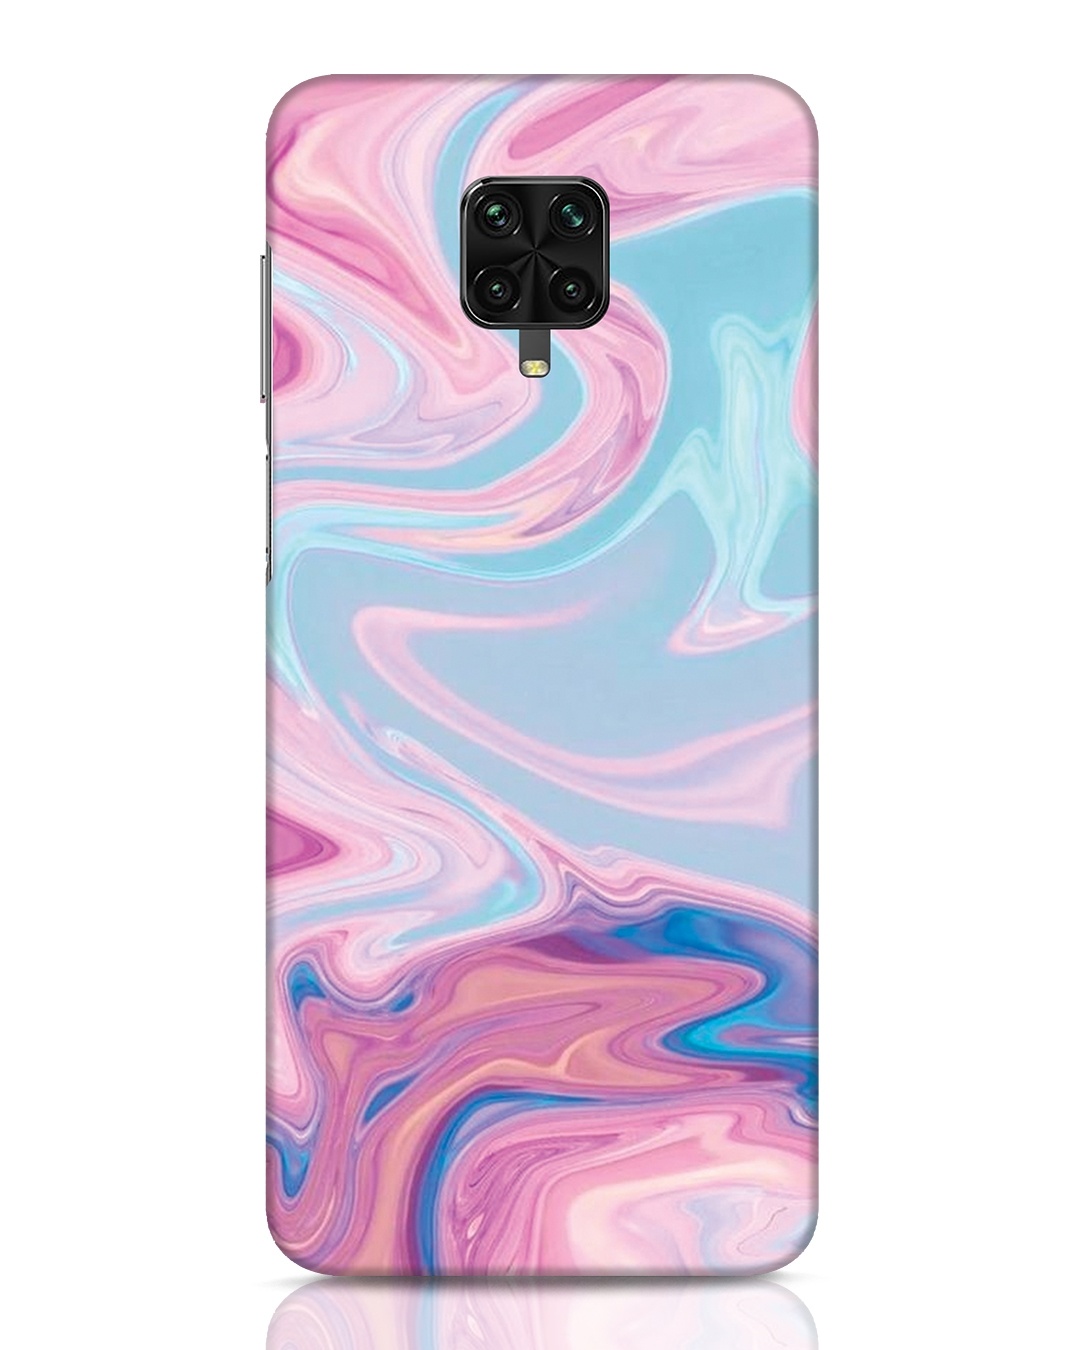 Buy Pink Marble Texture Designer Hard Cover For Xiaomi Poco M2 Pro Online In India At Bewakoof 6648